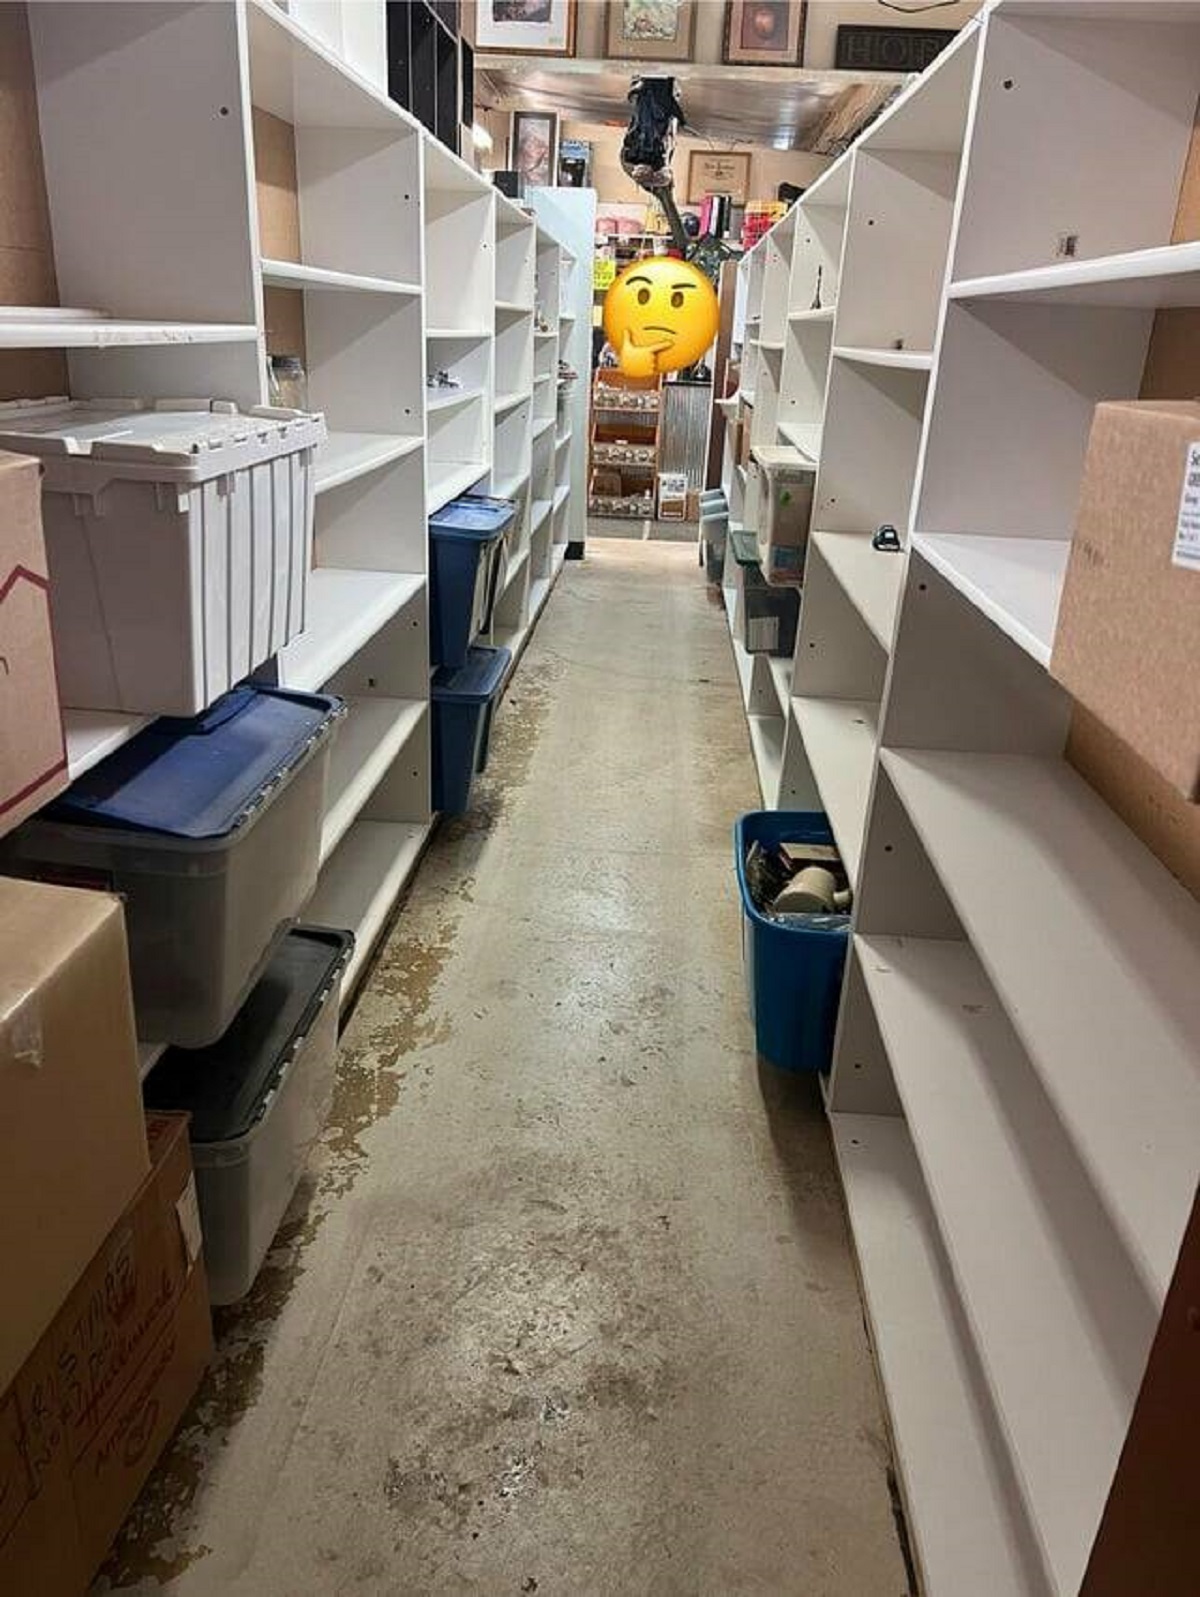 "Drove an hour to my favorite thrift store for their 1/2 sale and this was their shelves…"